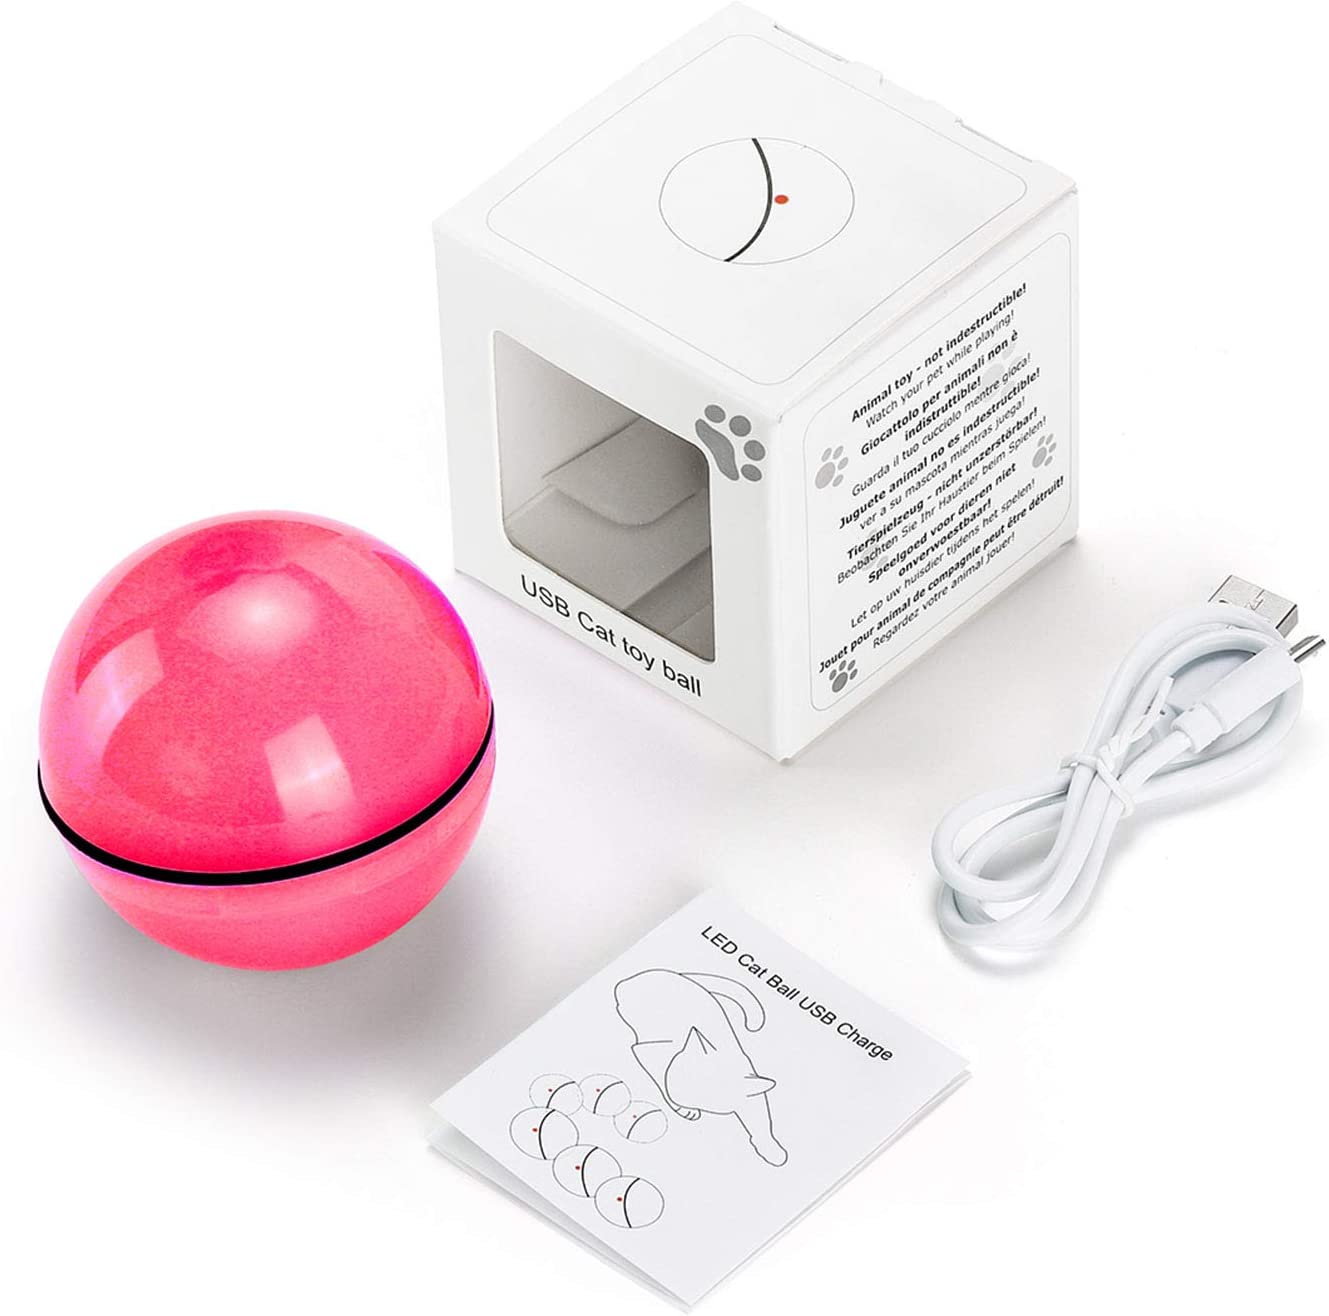 Interactive Cat Toys Ball Automatic Self-Rotating Rolling Ball With USB Rechargeable Pet Exercise Chase Toy Ball